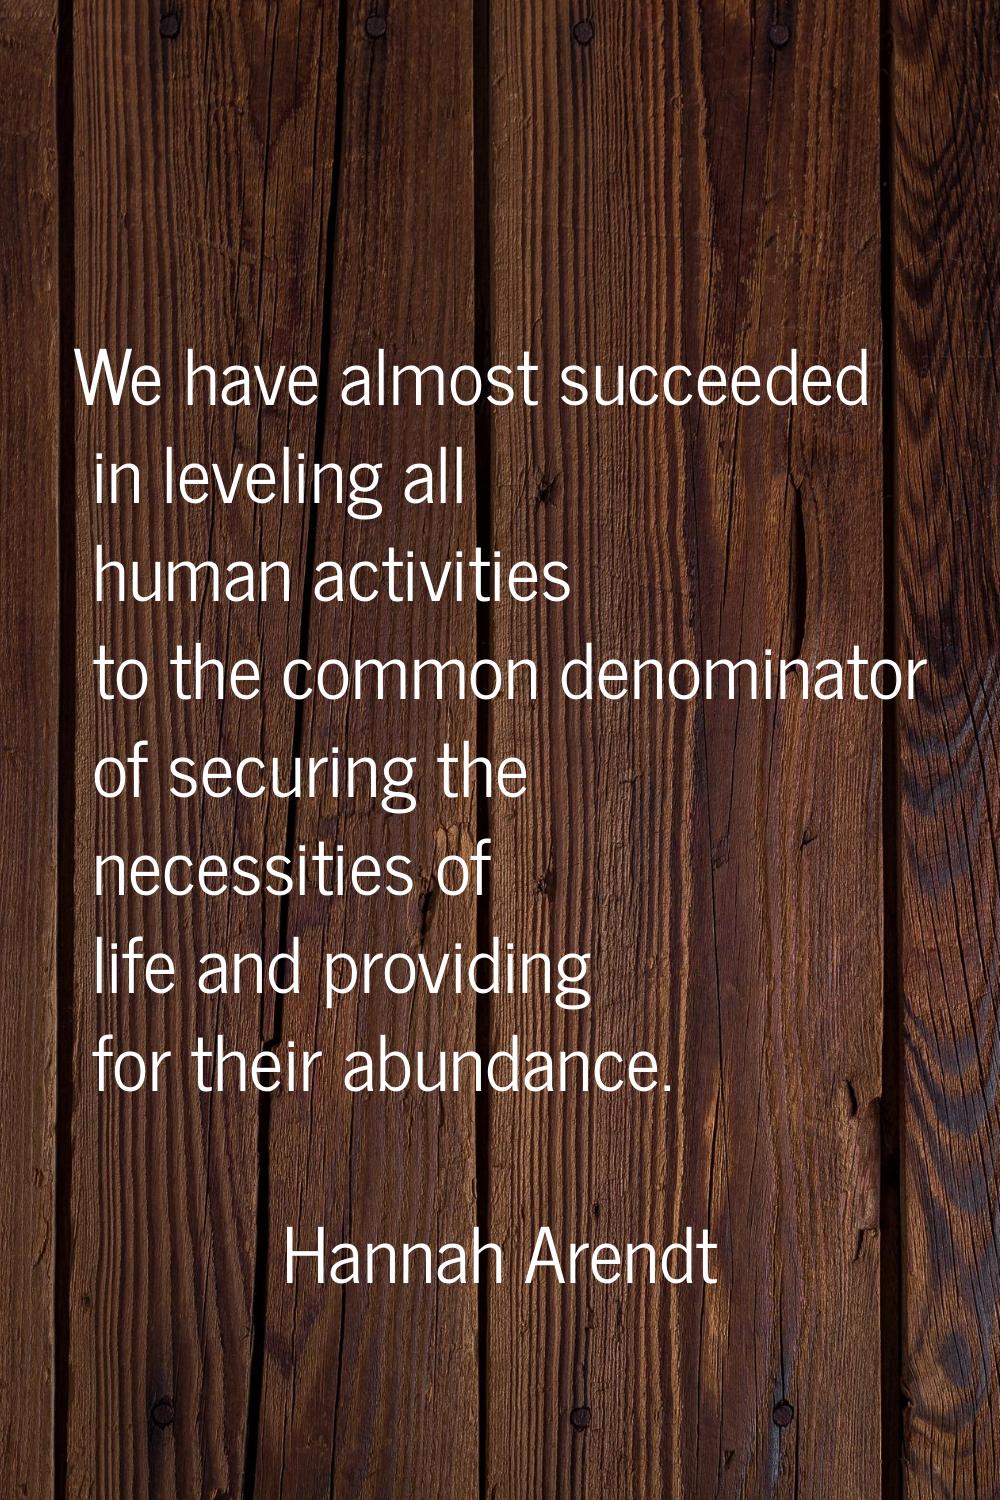 We have almost succeeded in leveling all human activities to the common denominator of securing the